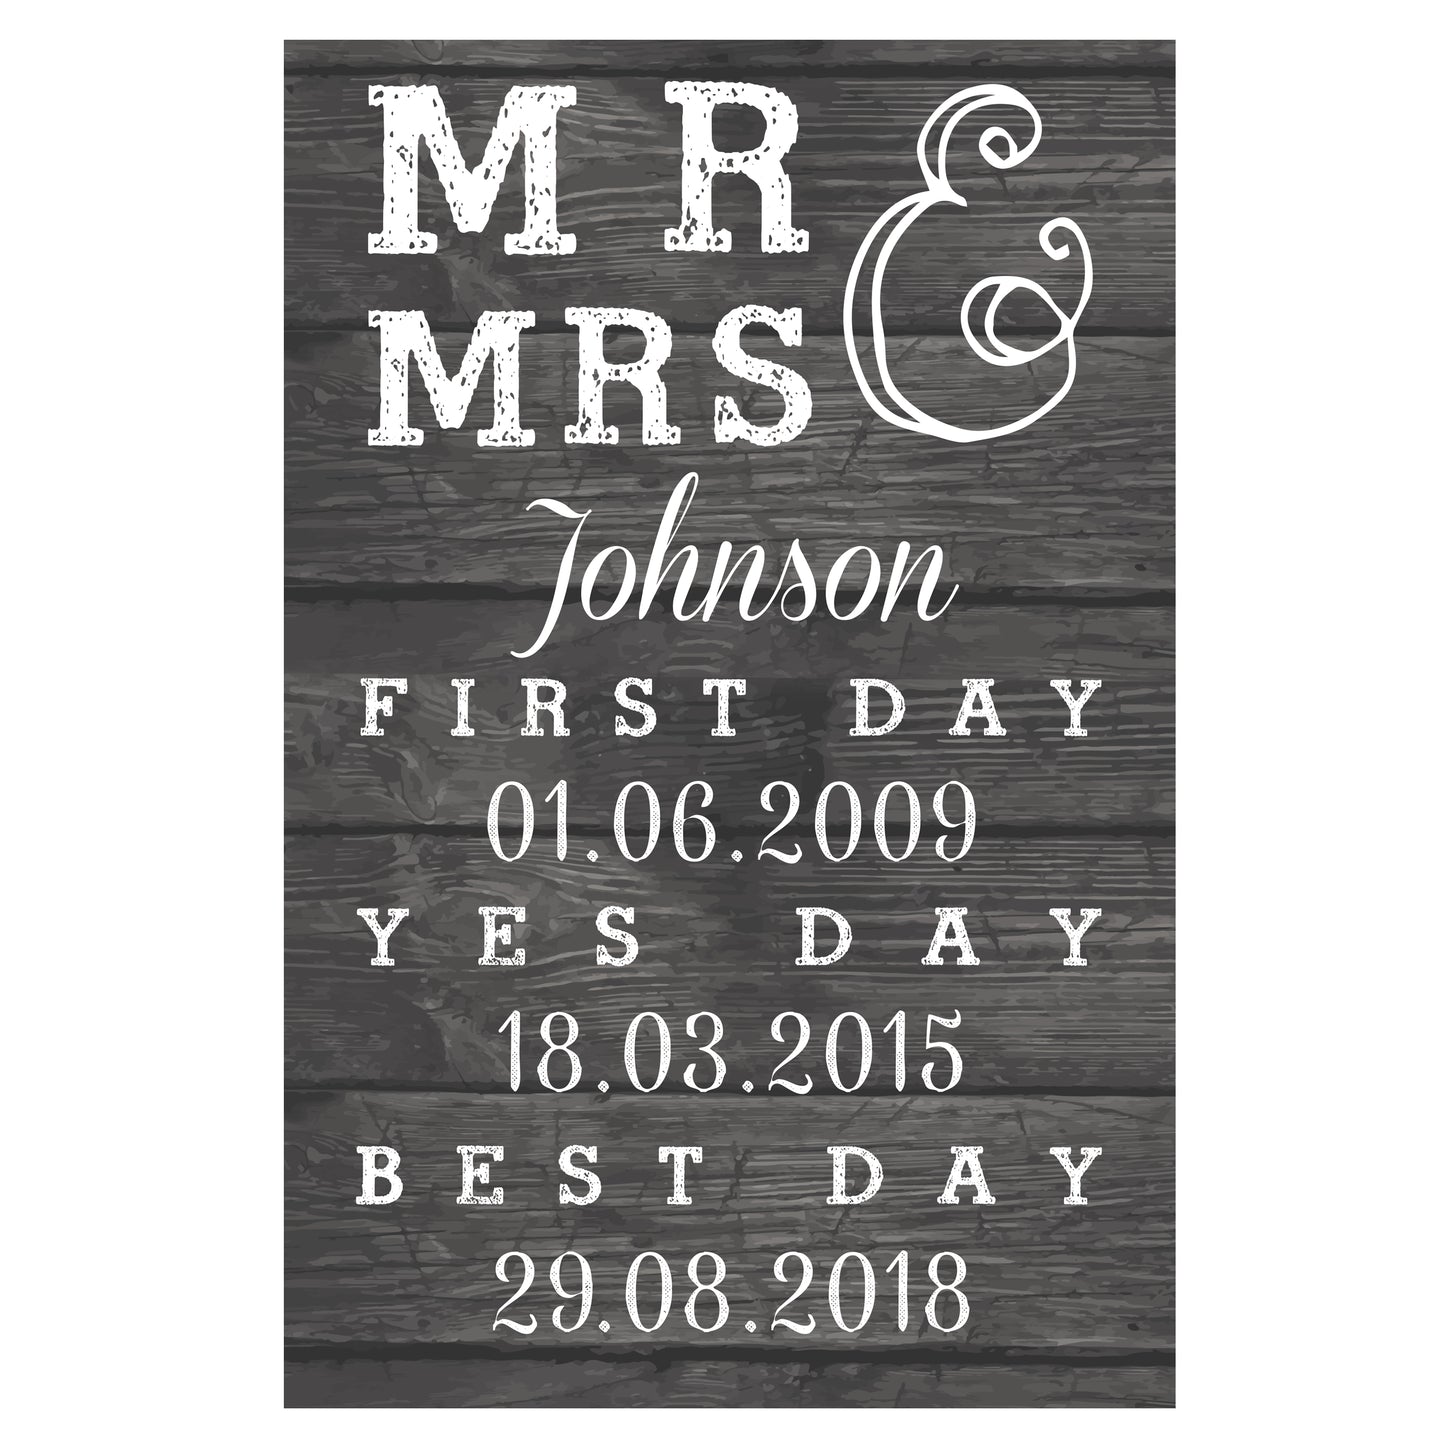 Personalised Mr & Mrs, First Day, Yes Day & Best Day Metal Sign - Personalise It!